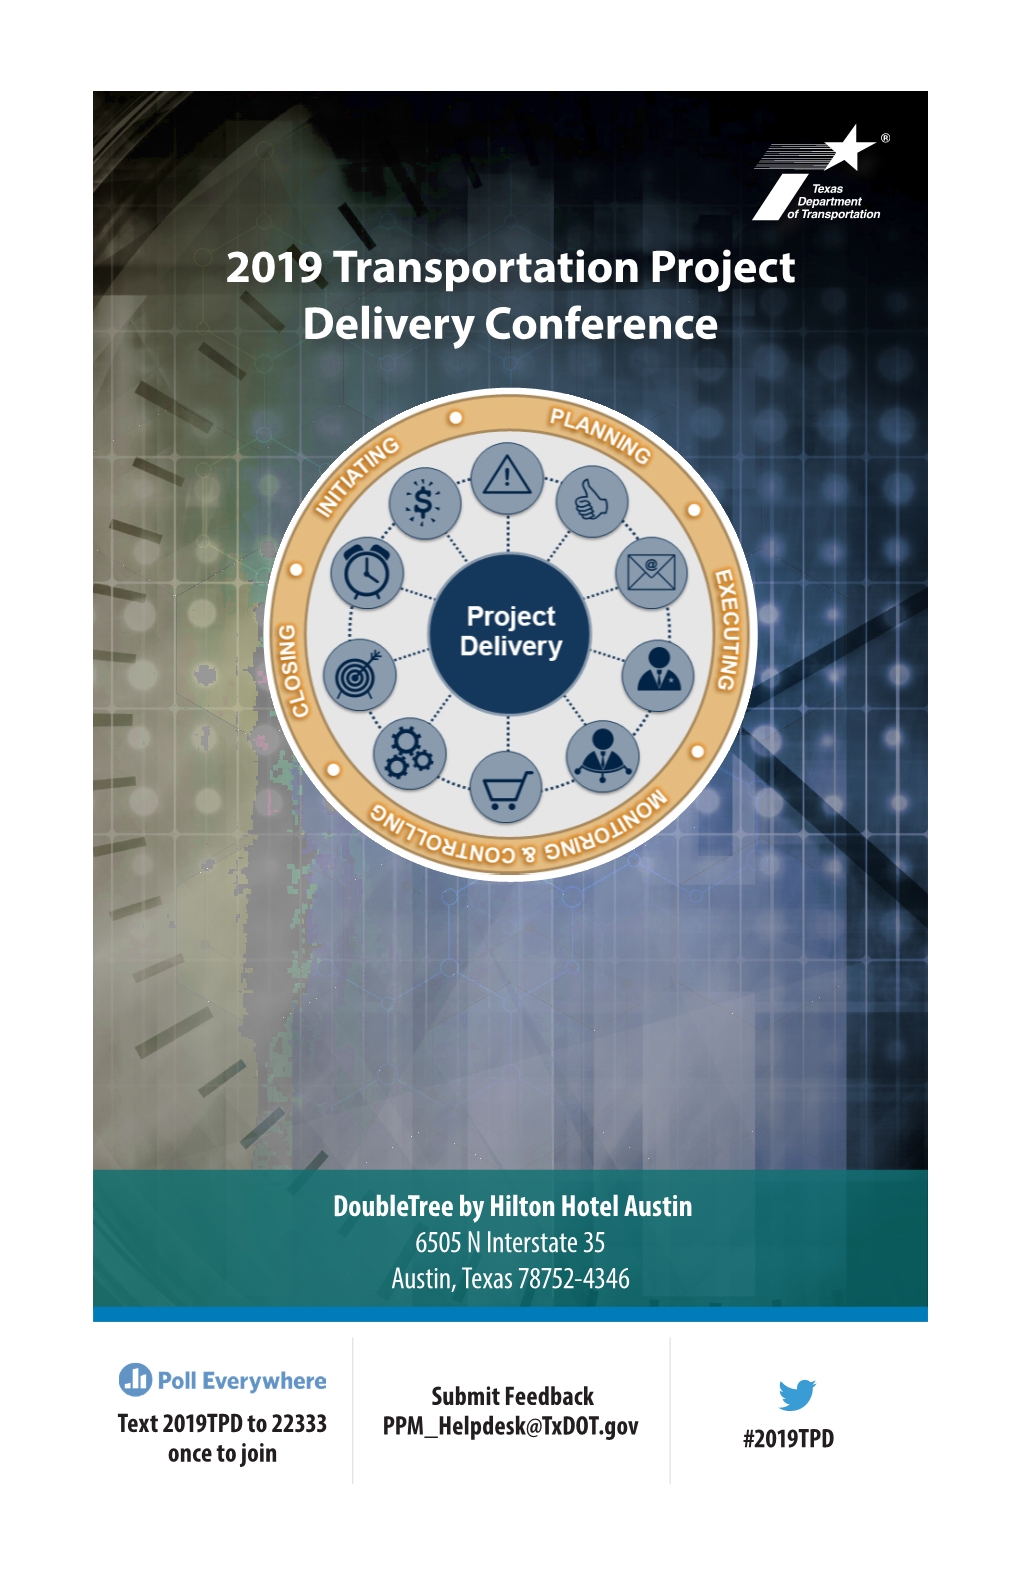 2019 Transportation Project Delivery Conference